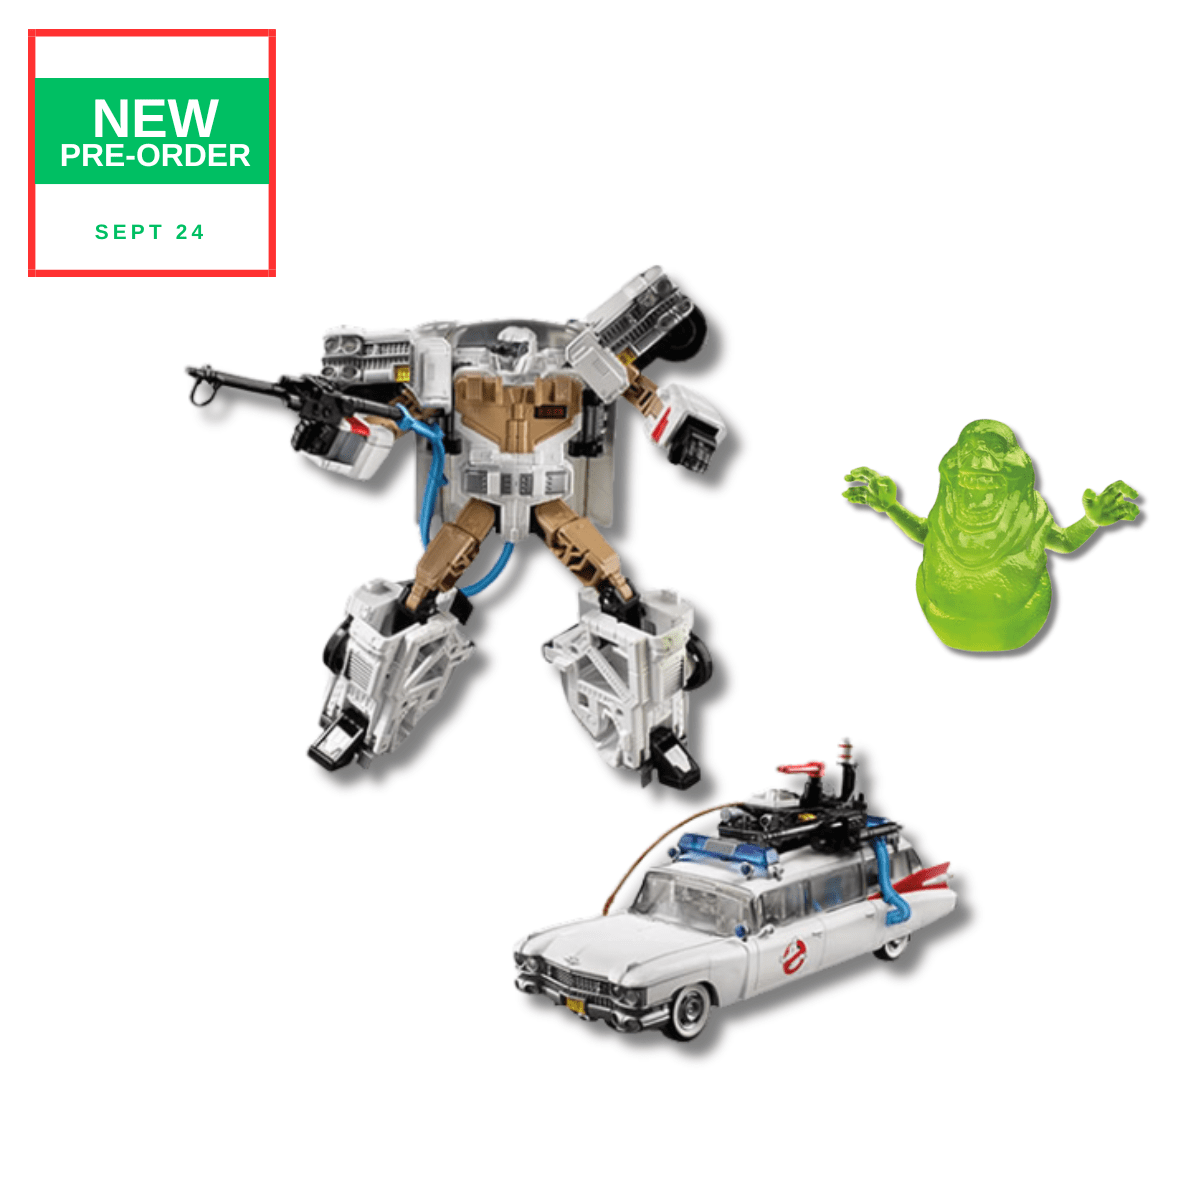 Transformers Generations Ghostbusters Ecto-1 Ectotron Pre-Order - World Of Kidz 